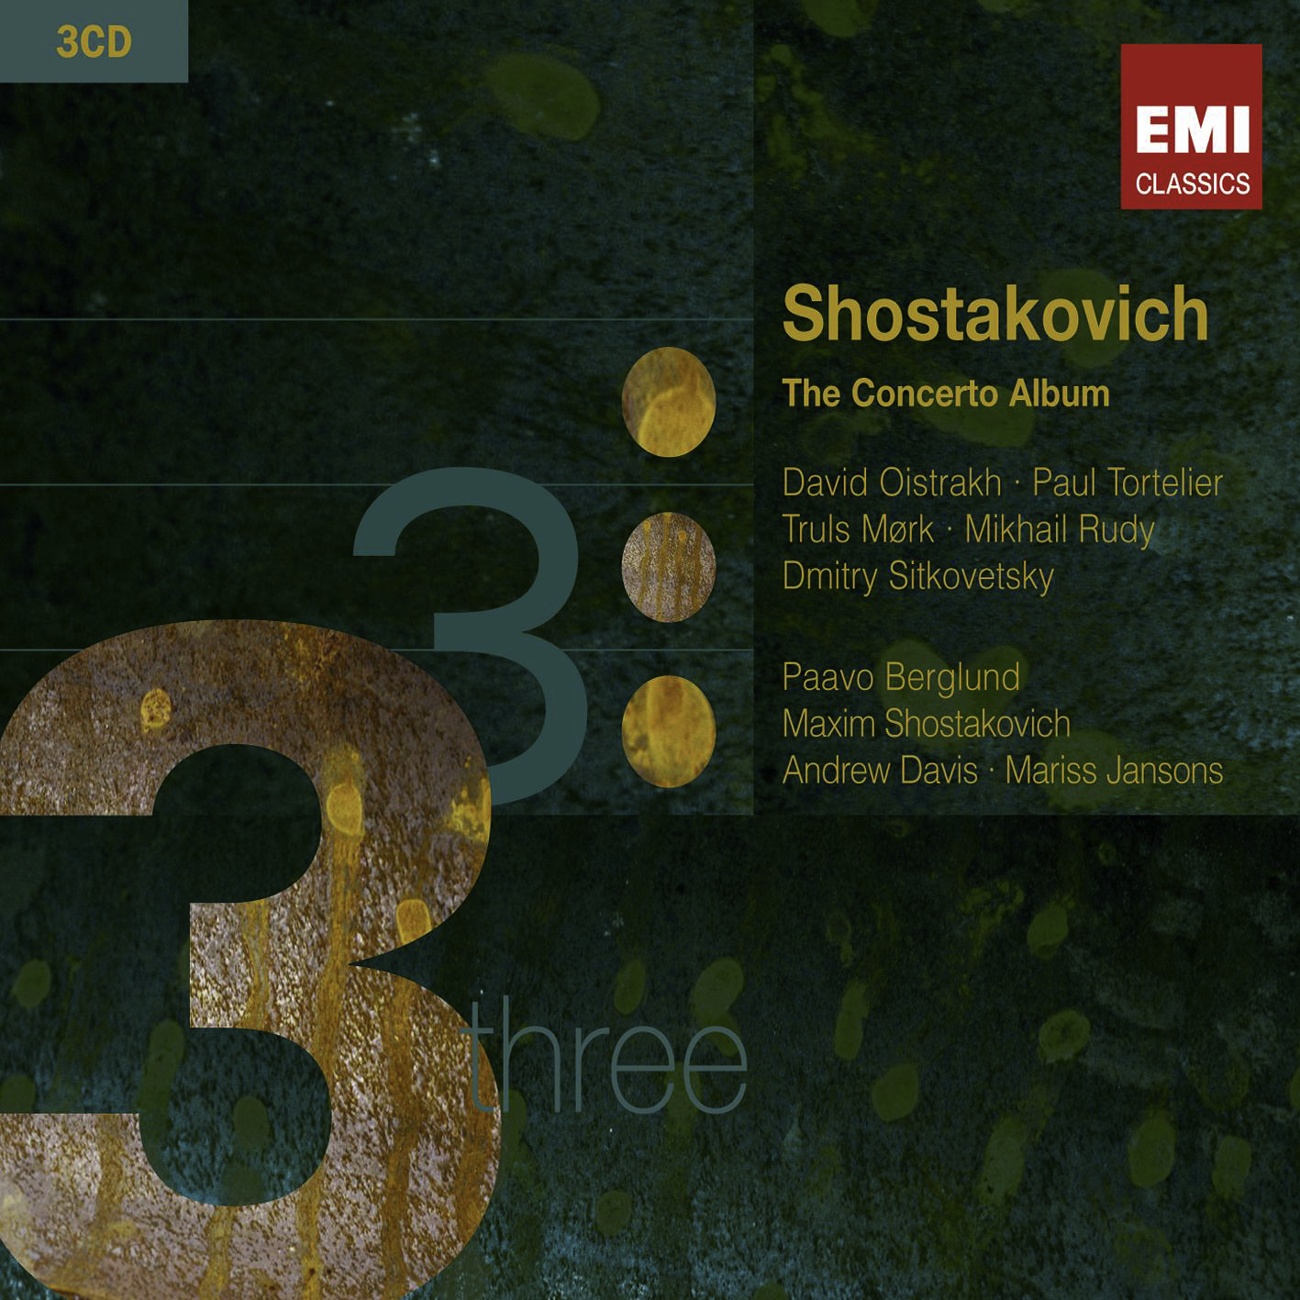 Quintet for Piano and Strings in G minor Op. 57: IV.     Intermezzo: Lento